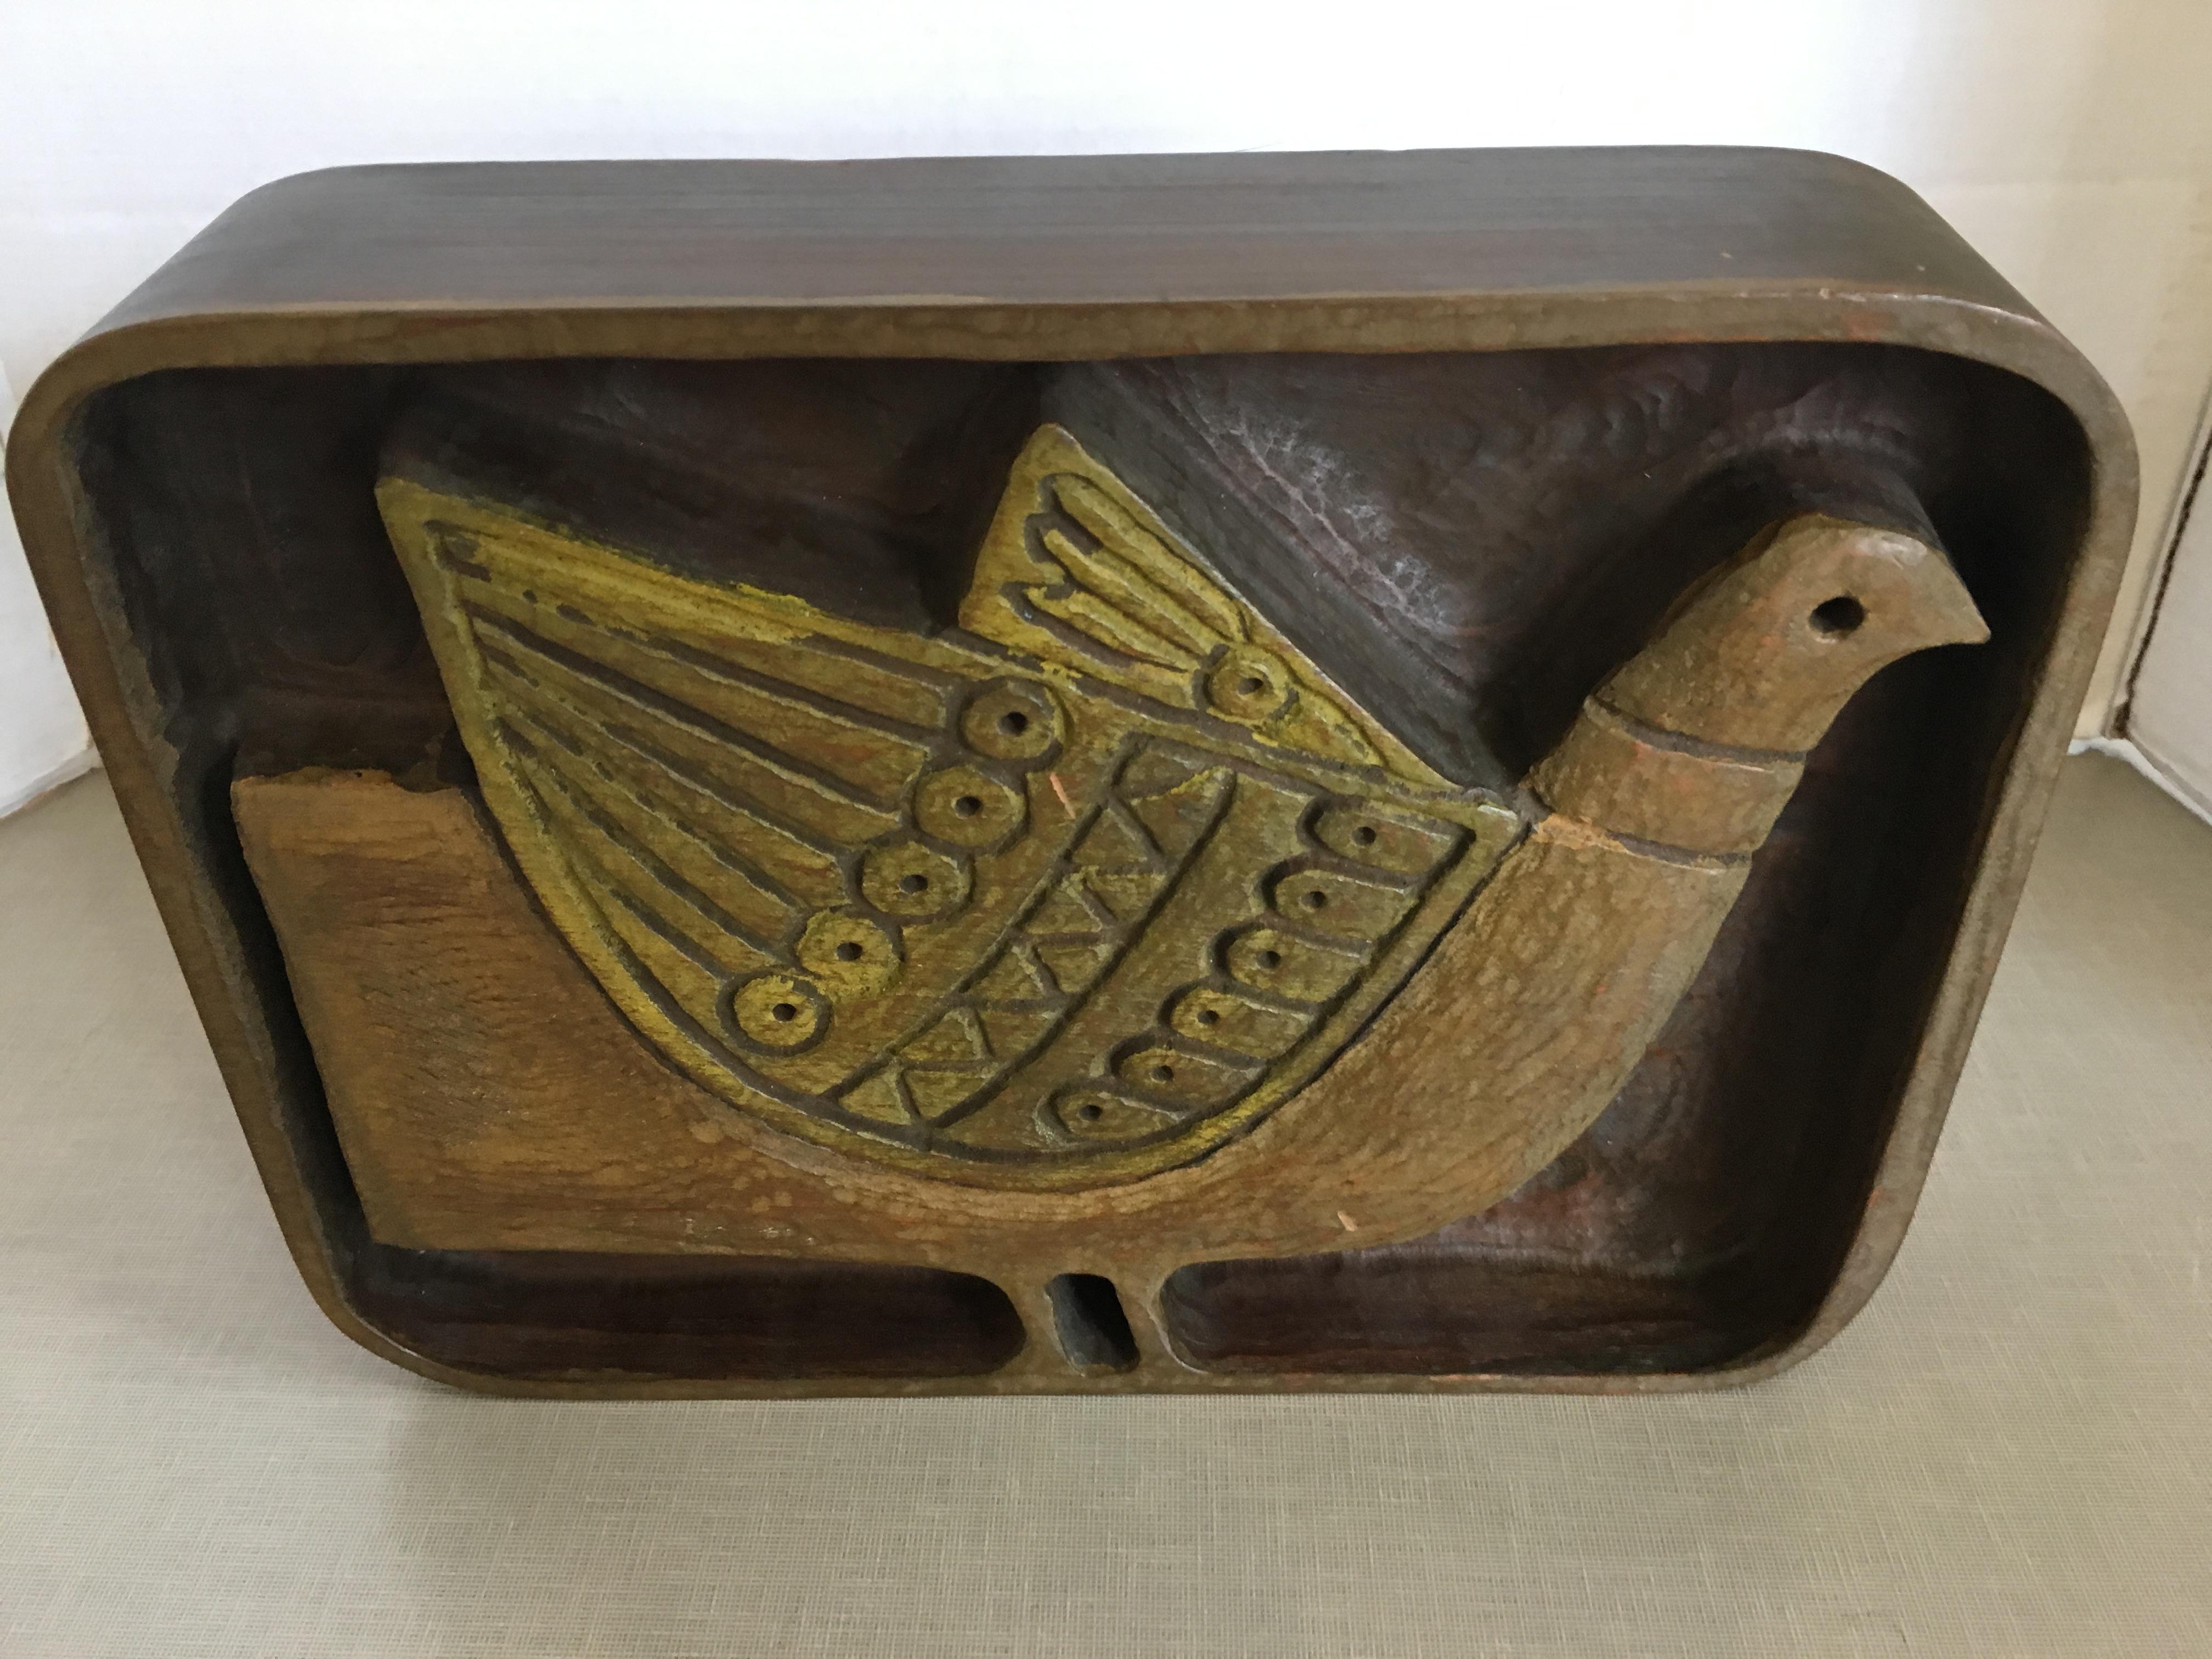 A carved wood bird plaque by Evelyn Ackerman.